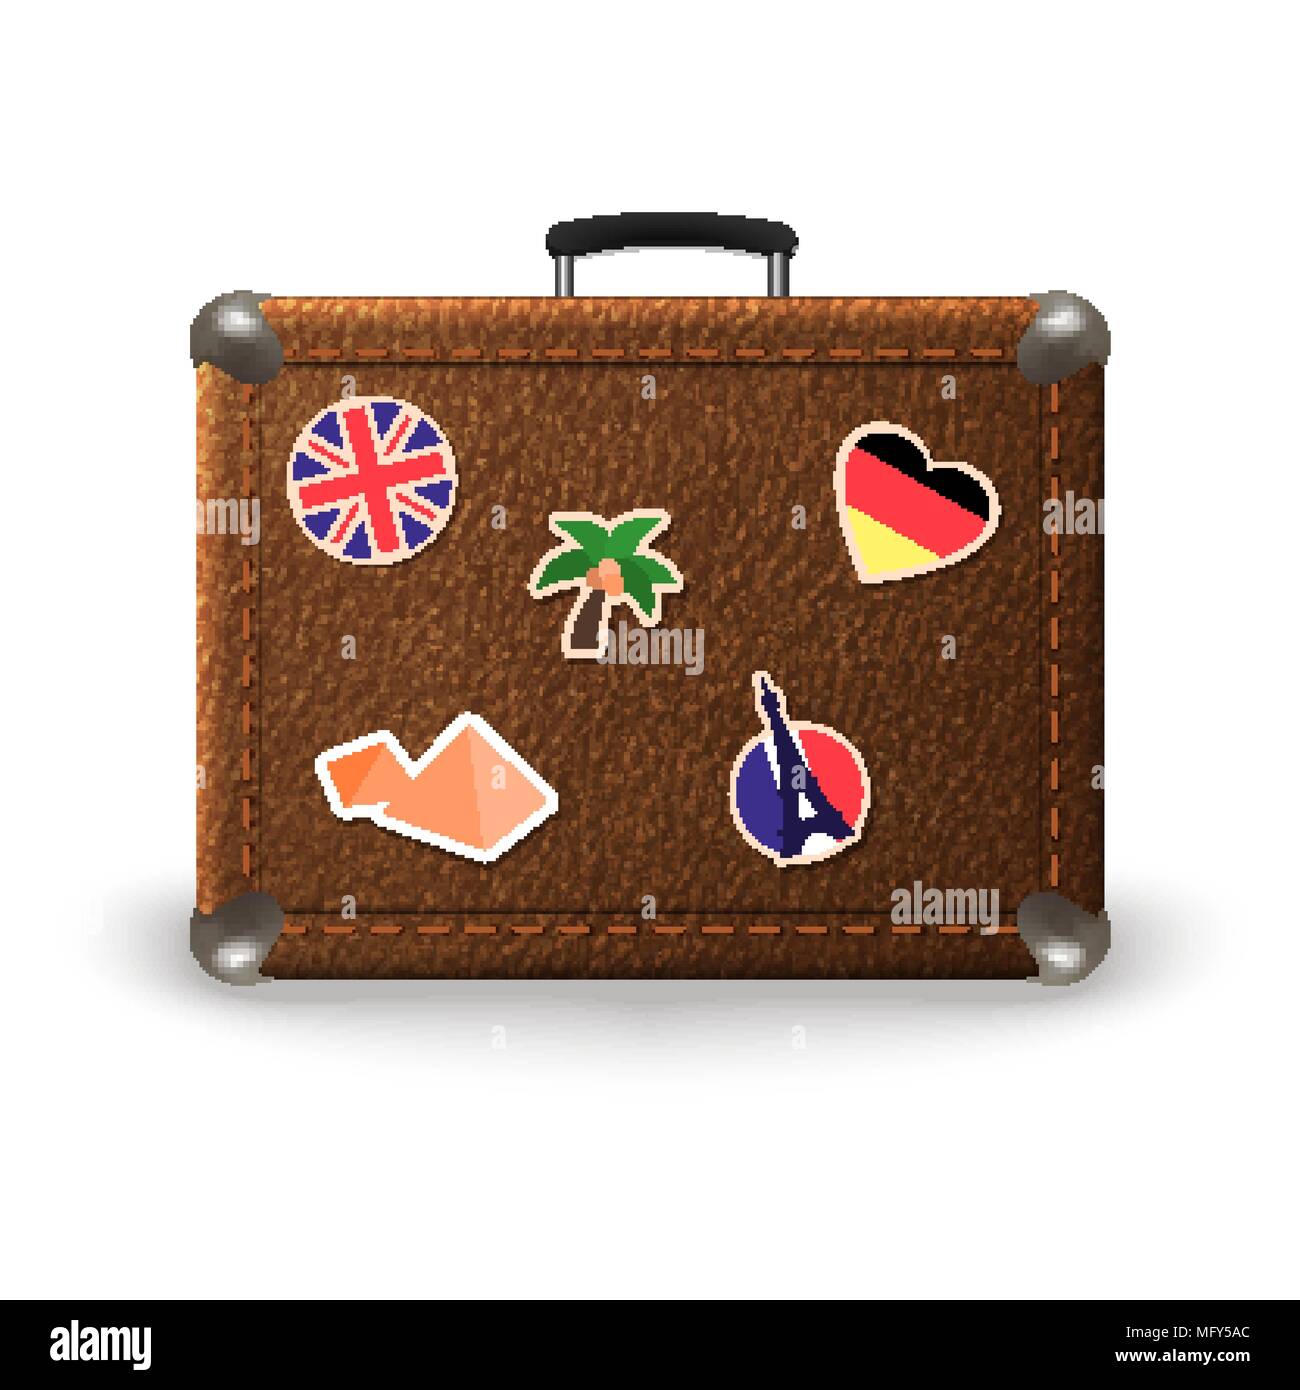 Vintage Suitcase With Stickers 65